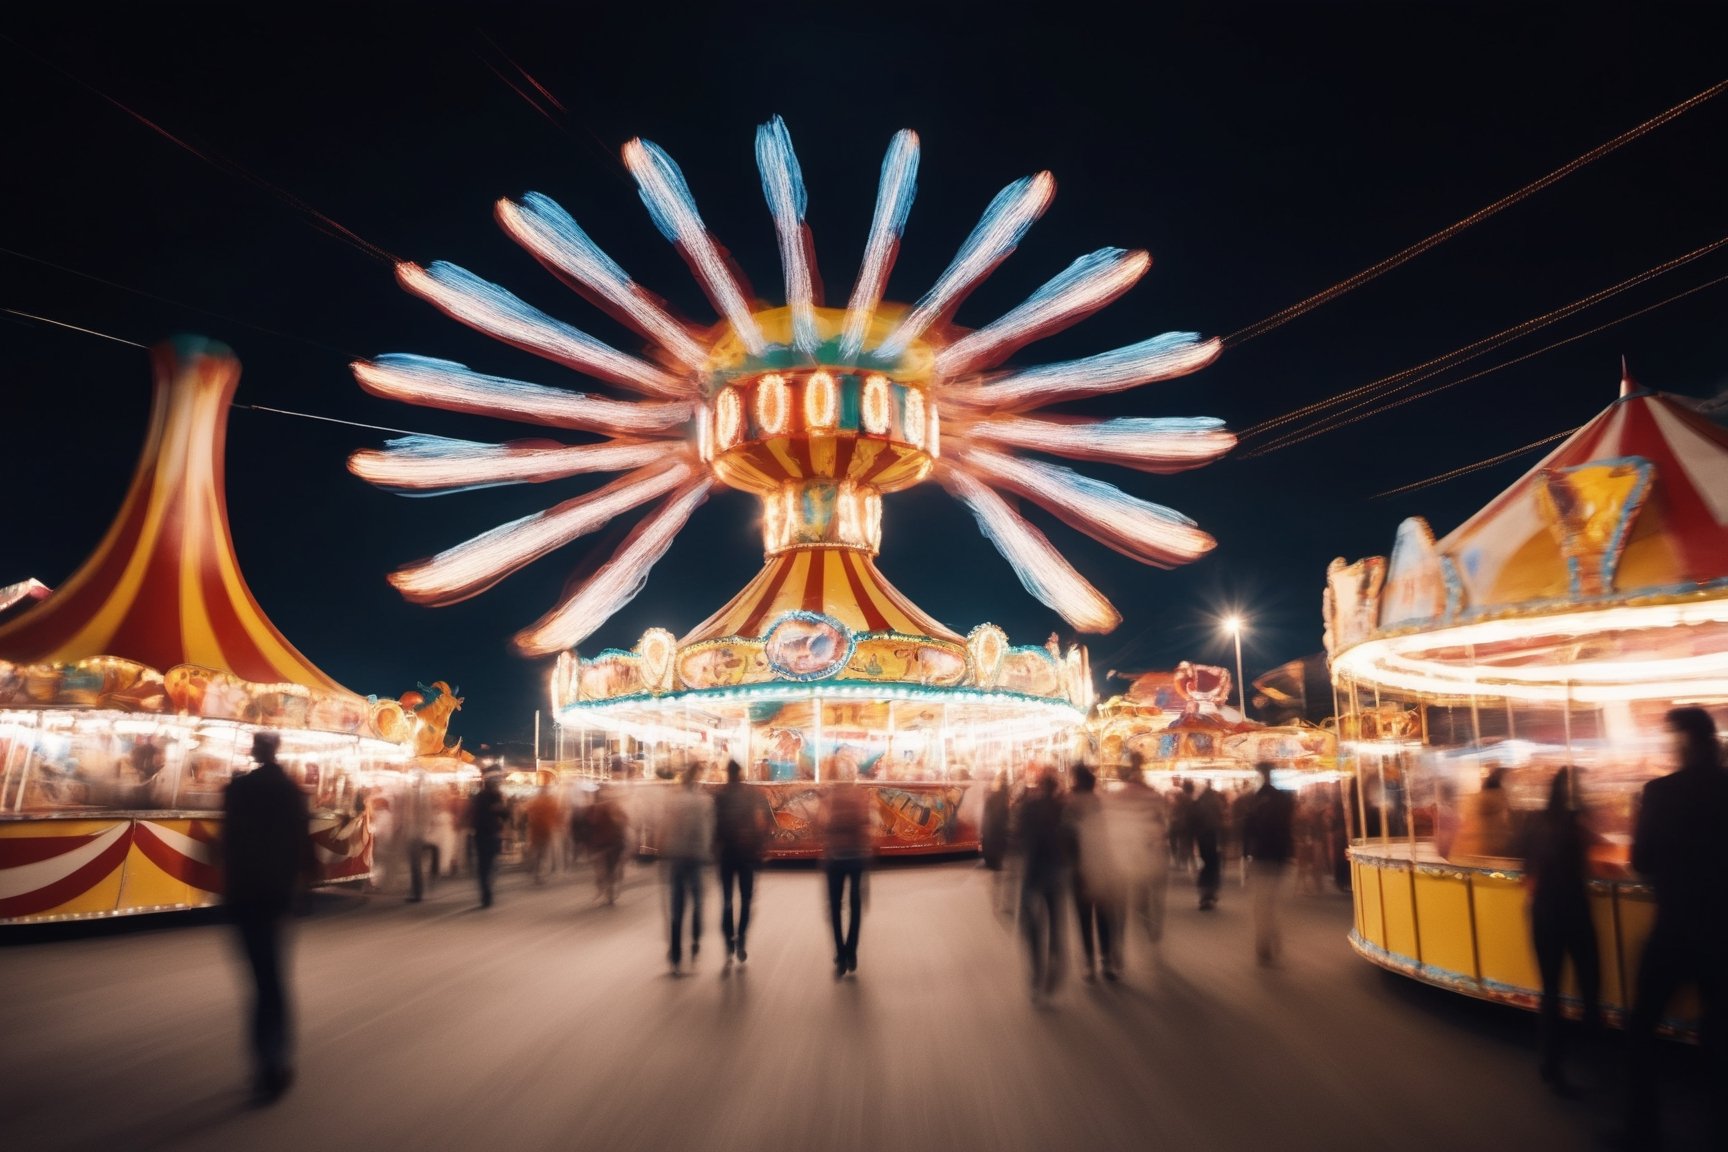 long exposure photo of a carnival at night. Blurred motion, streaks of light, surreal, dreamy, ghosting effect, highly detailed